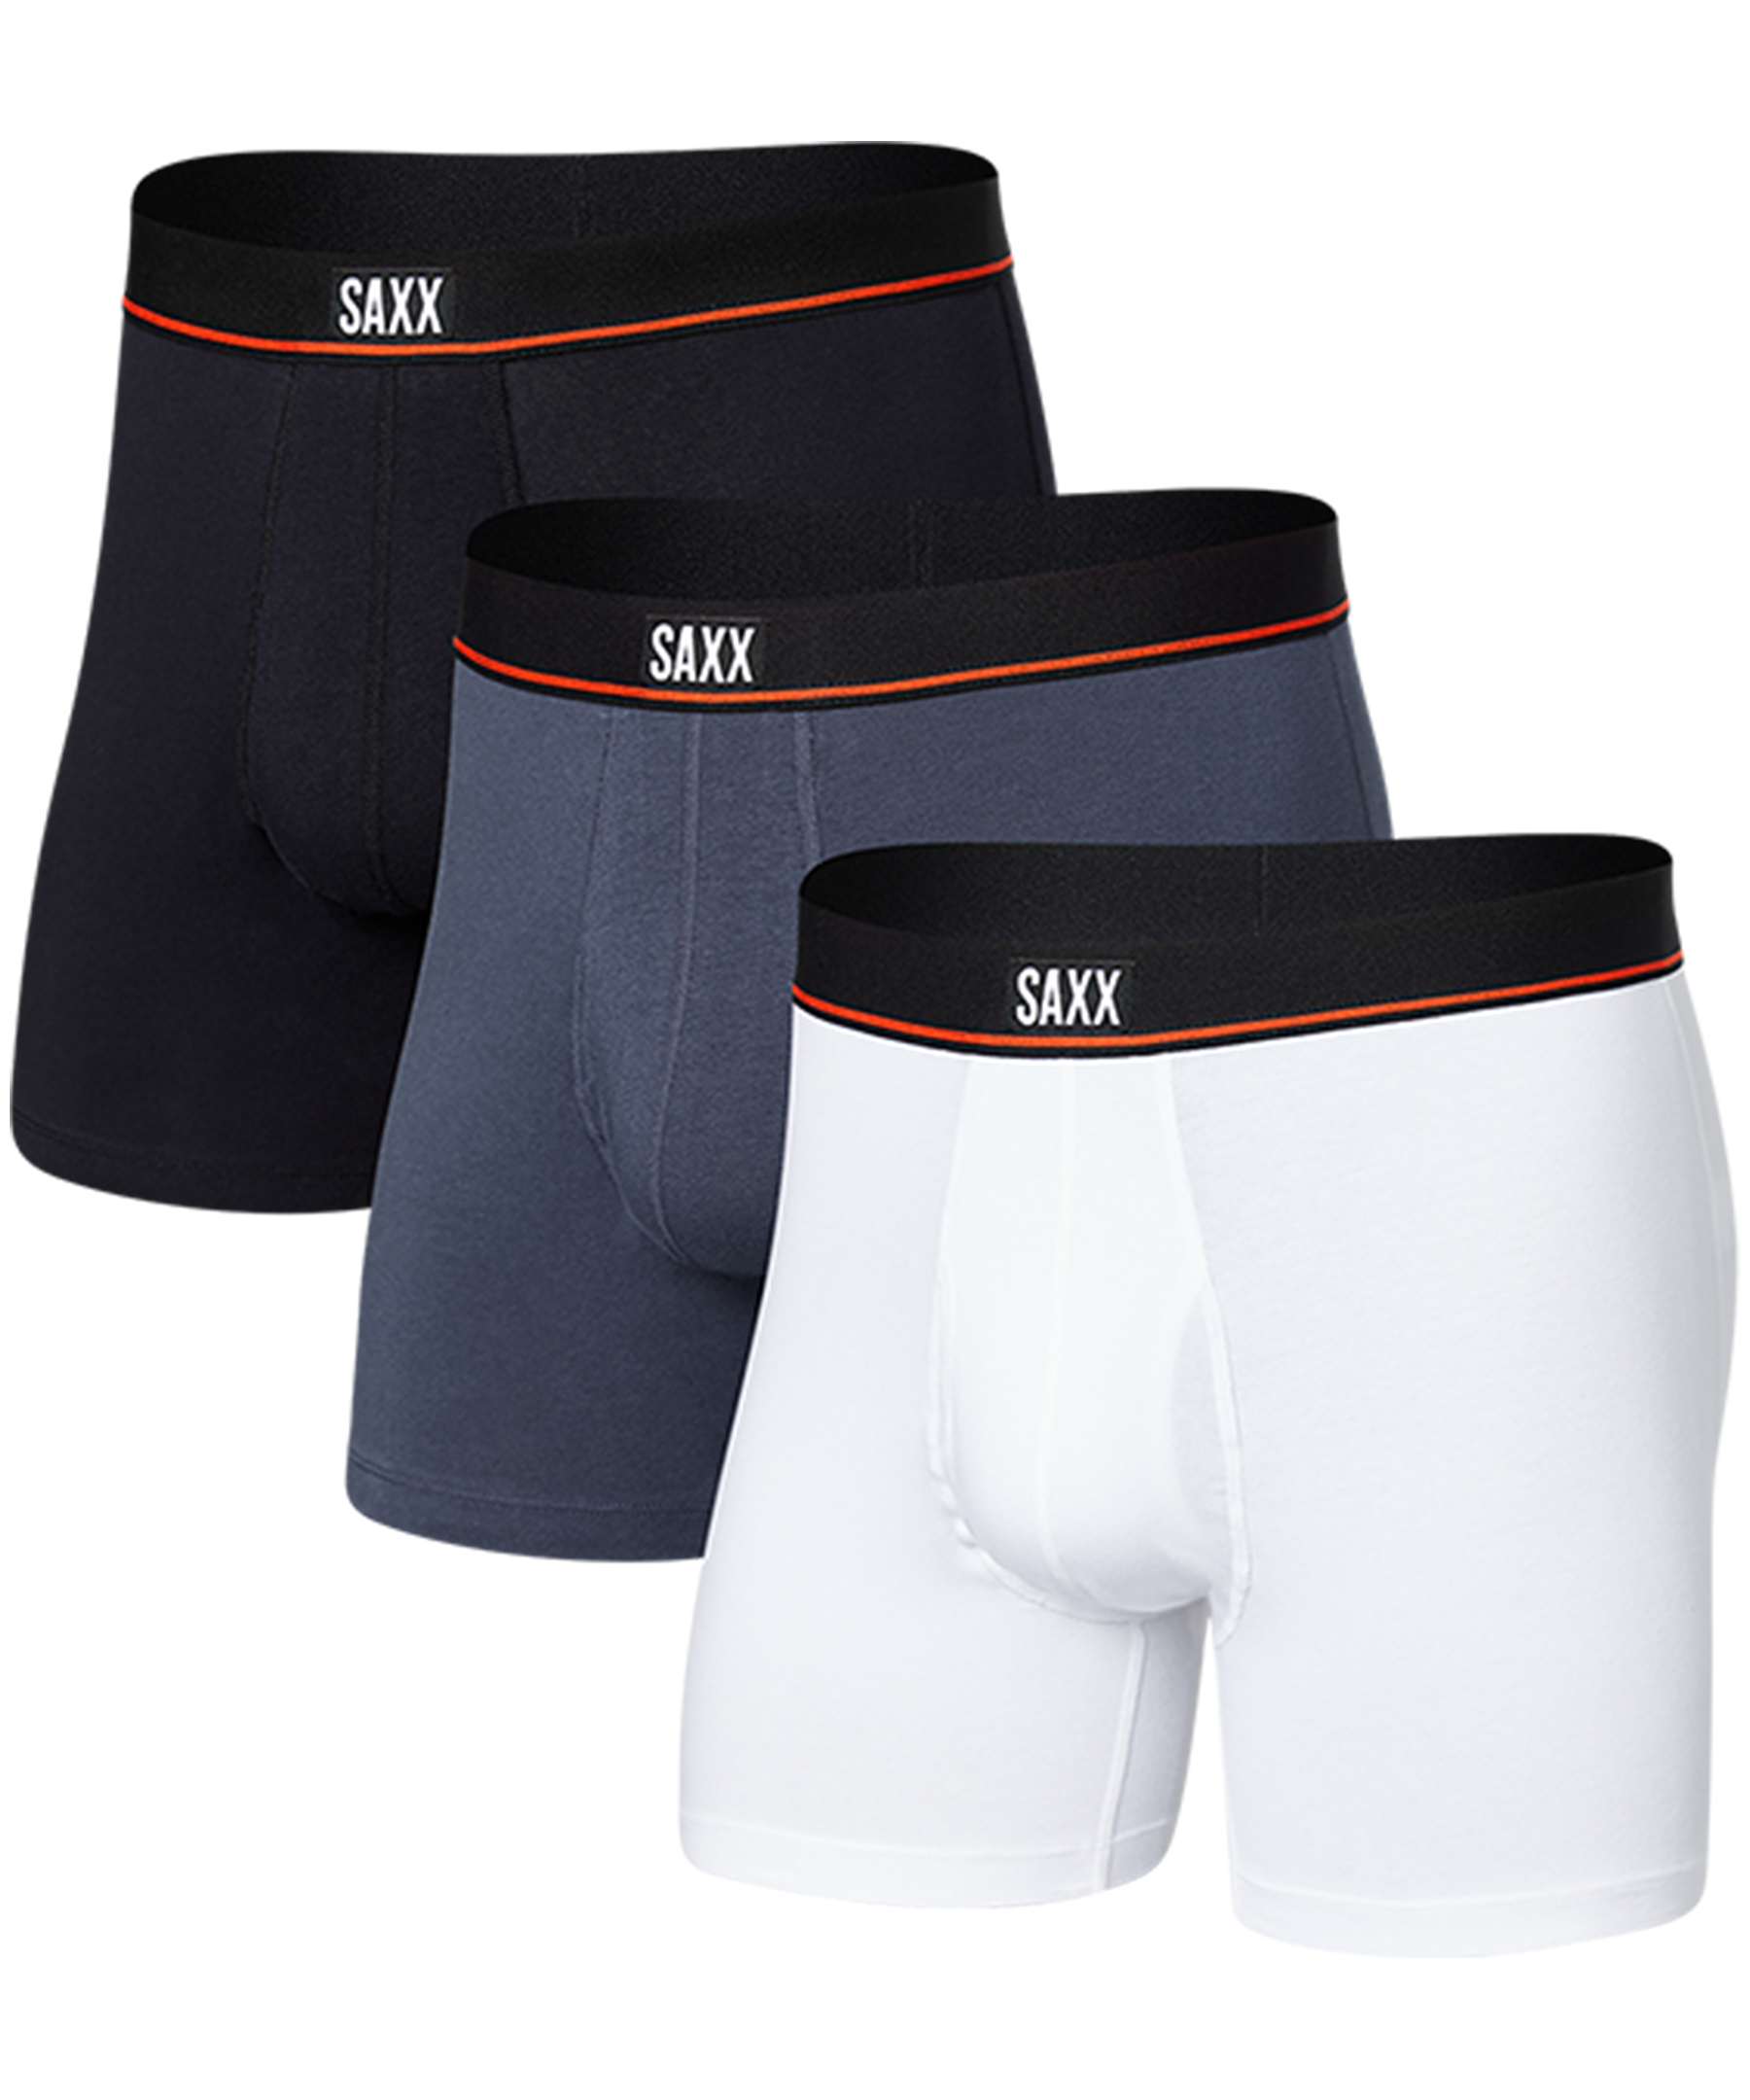 Stretch Cotton Boxer Briefs - Pack of 3